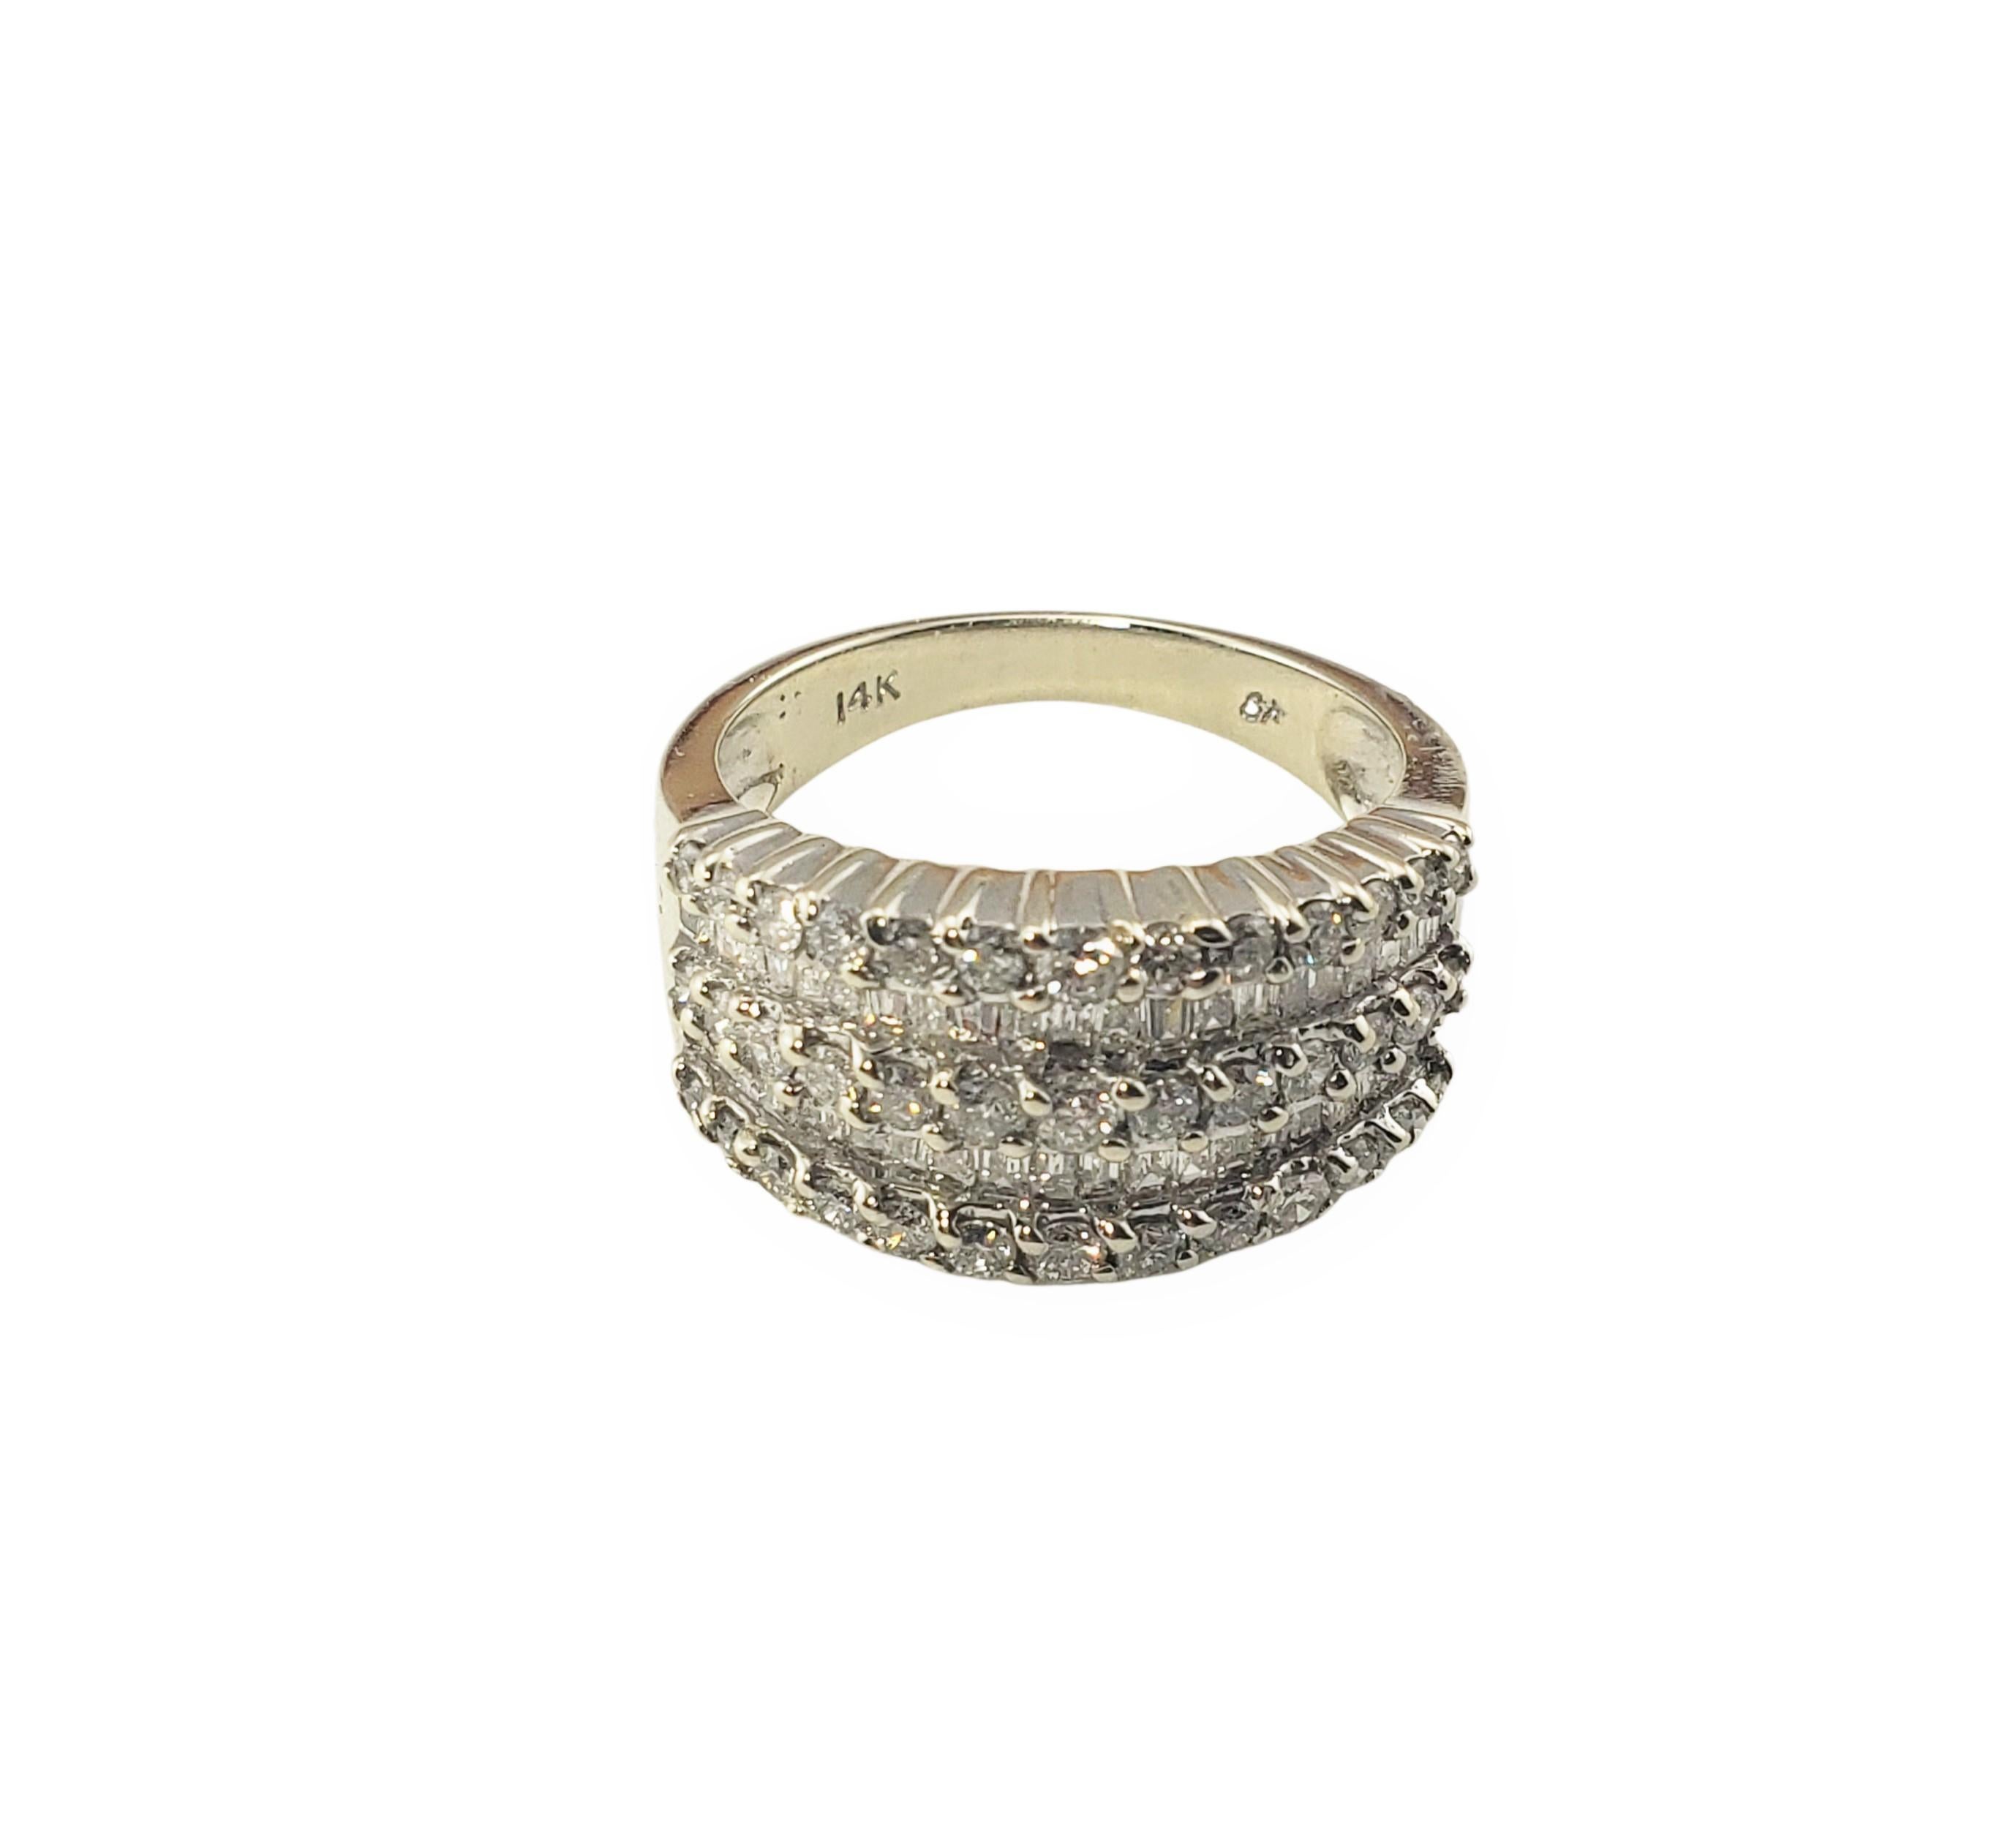 14 Karat White Gold and Diamond Ring Size 7.25-

This sparkling band features 46 baguette diamonds and 39 round brilliant cut diamonds set in classic 14K white gold.  Width: 10 mm.
Shank:  3 mm.

Approximate total diamond weight:  2 ct.

Diamond